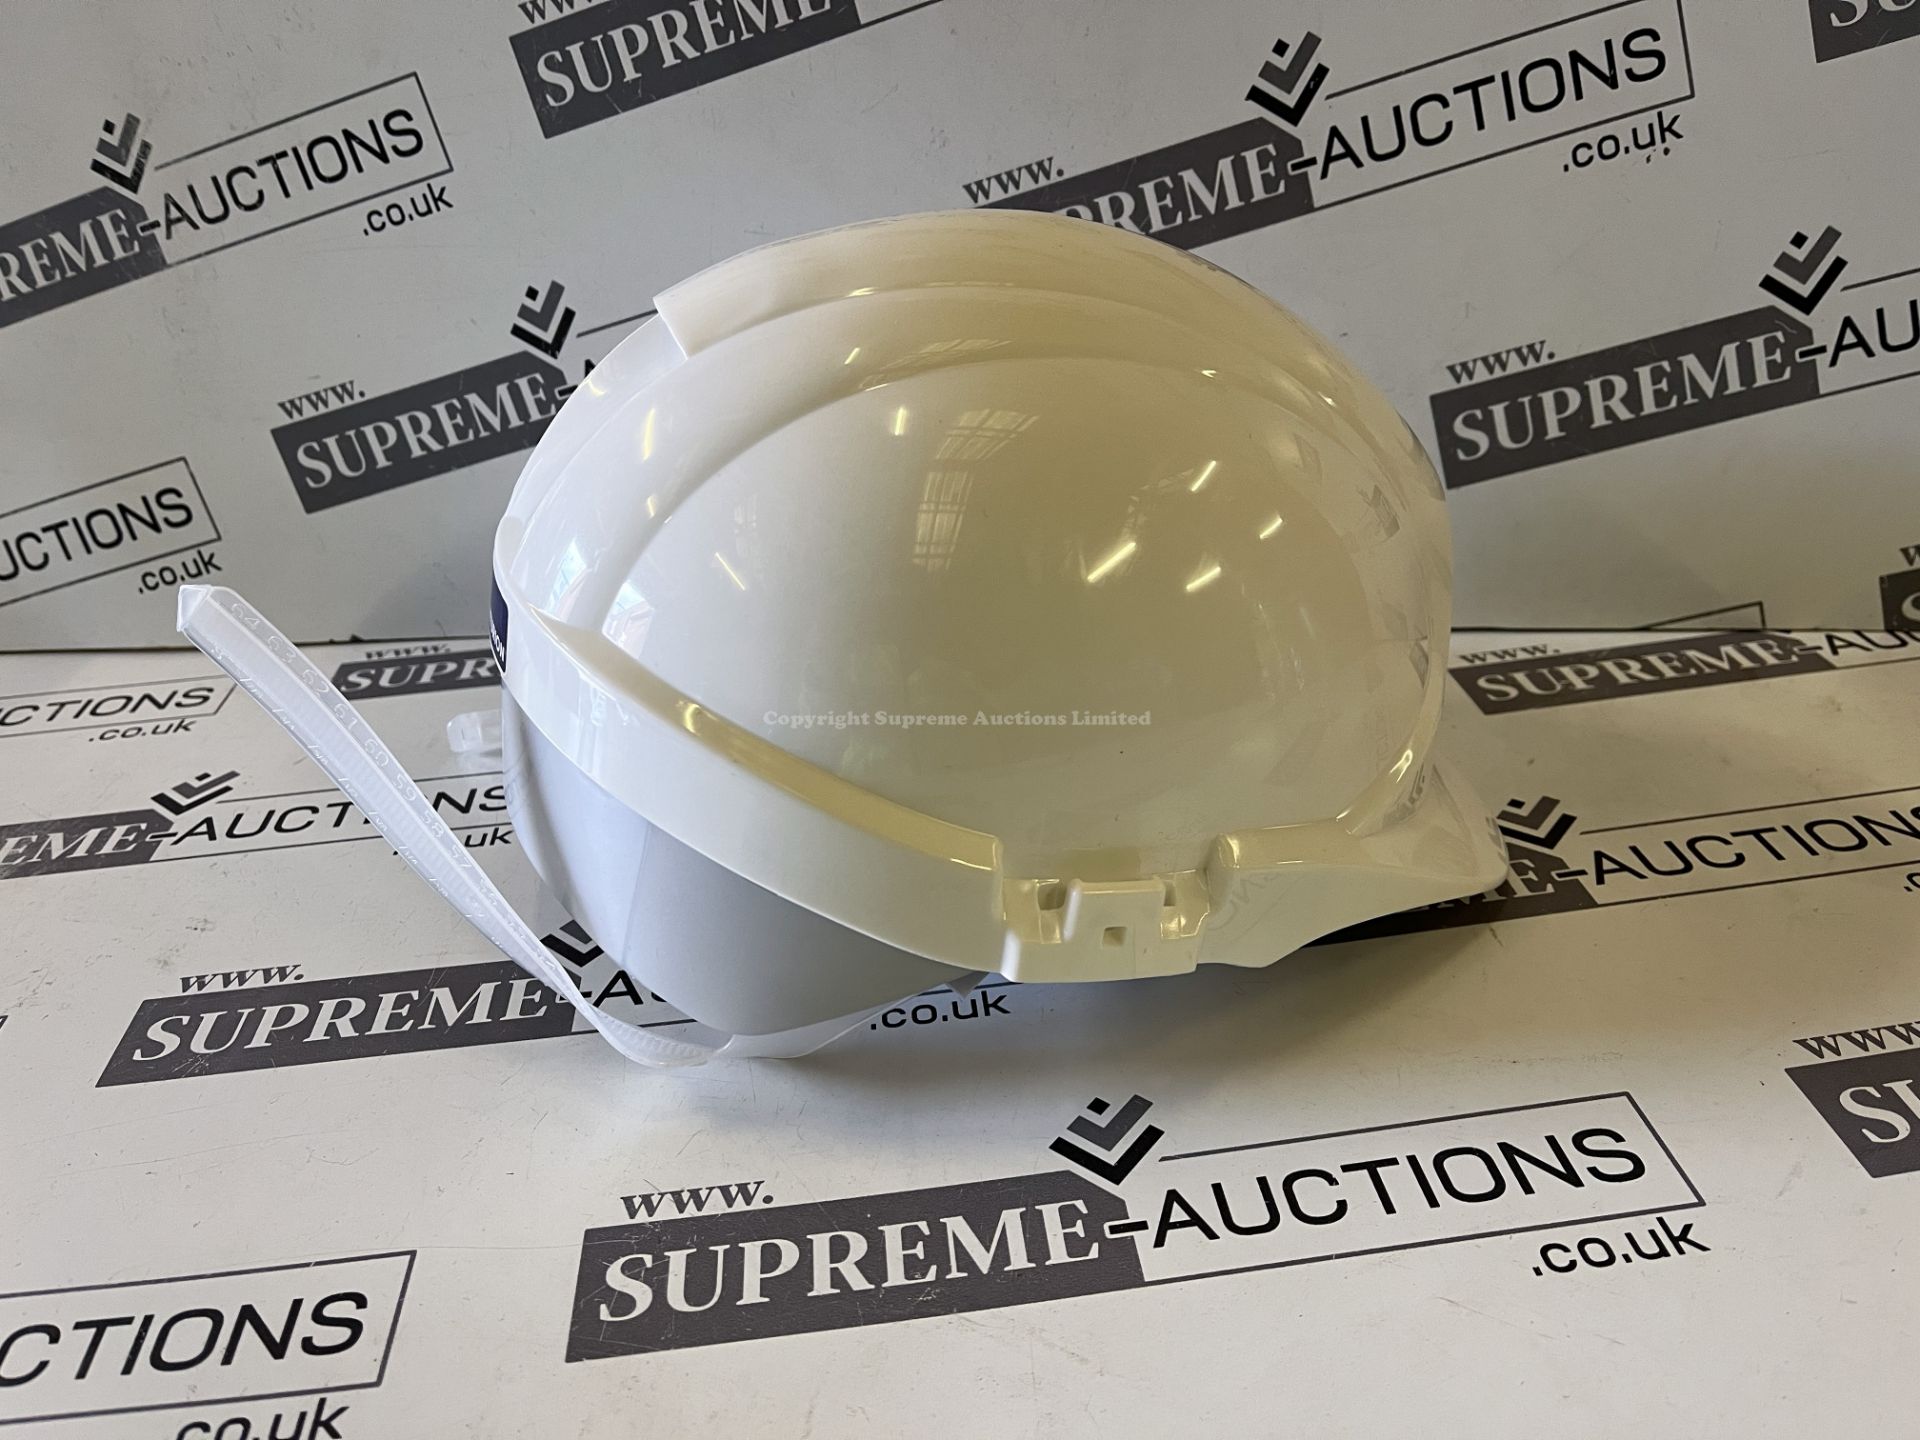 60x BRAND NEW ASSORTED HARD HATS IN WHITE. (S1.5)